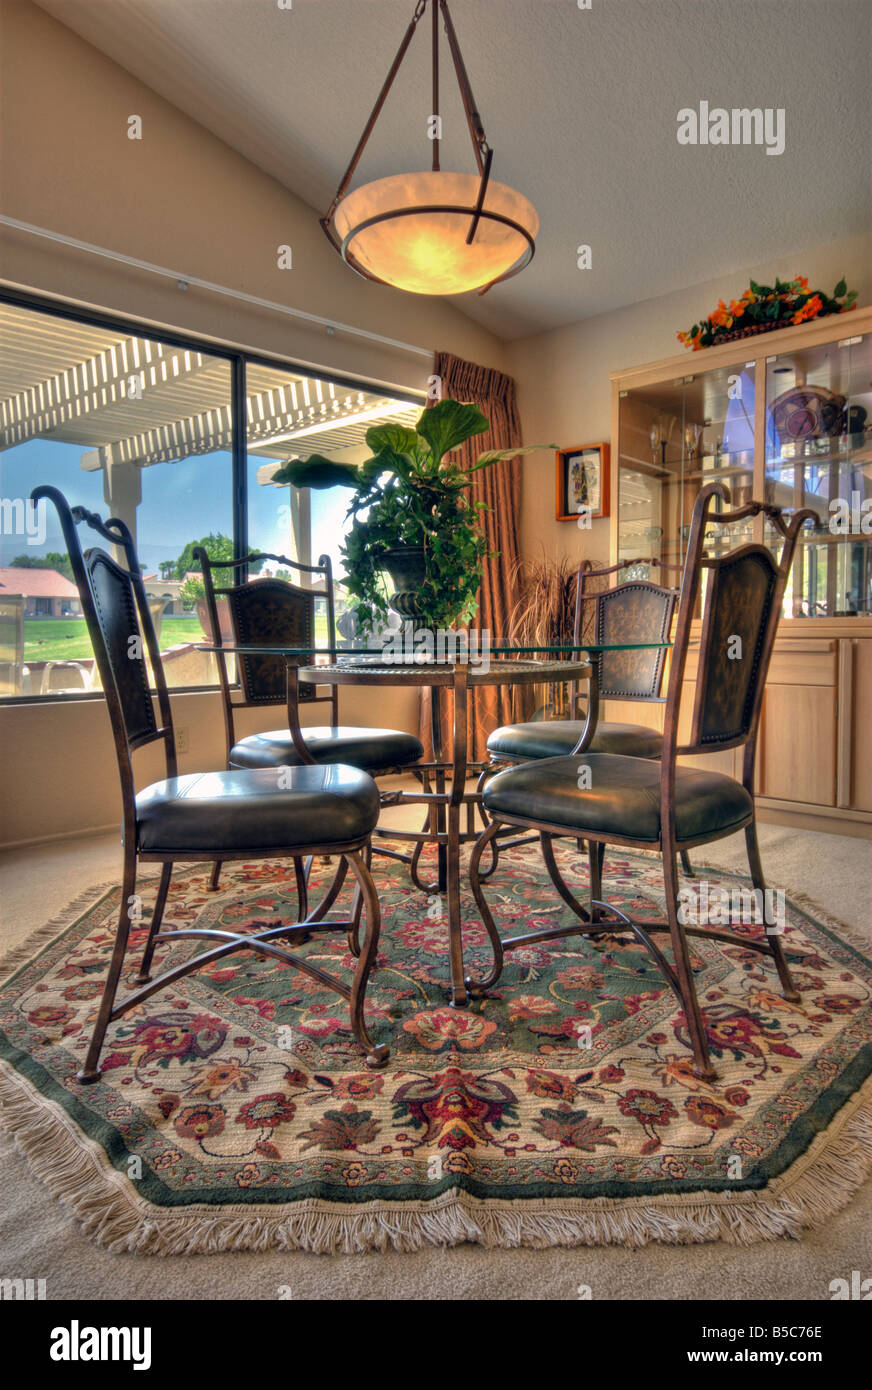 Dining room Palm Desert interior 12th green of the Oasis Country Club HDR lighting available light Stock Photo